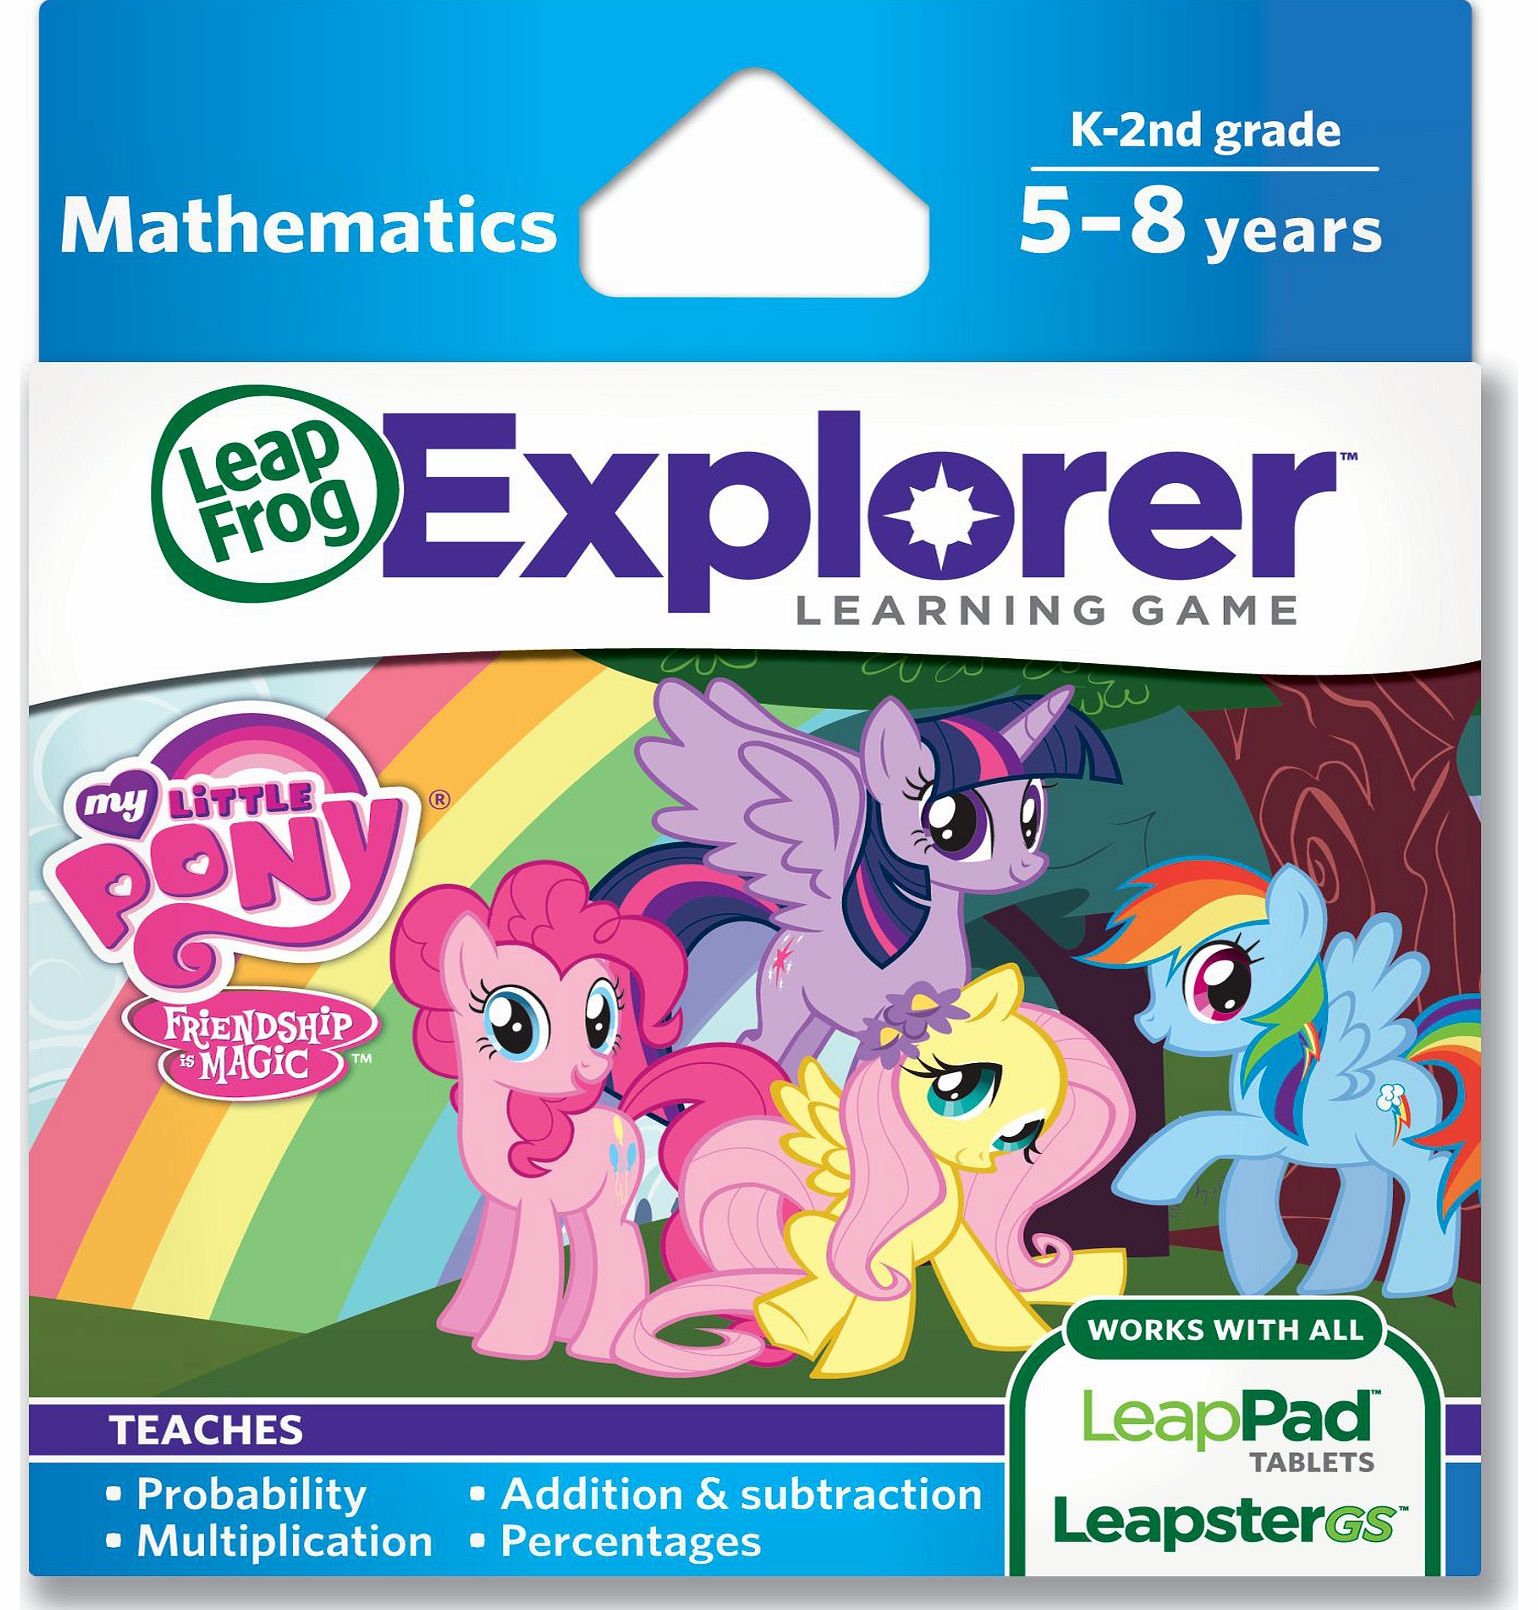 Explorer Learning Game - My Little Pony